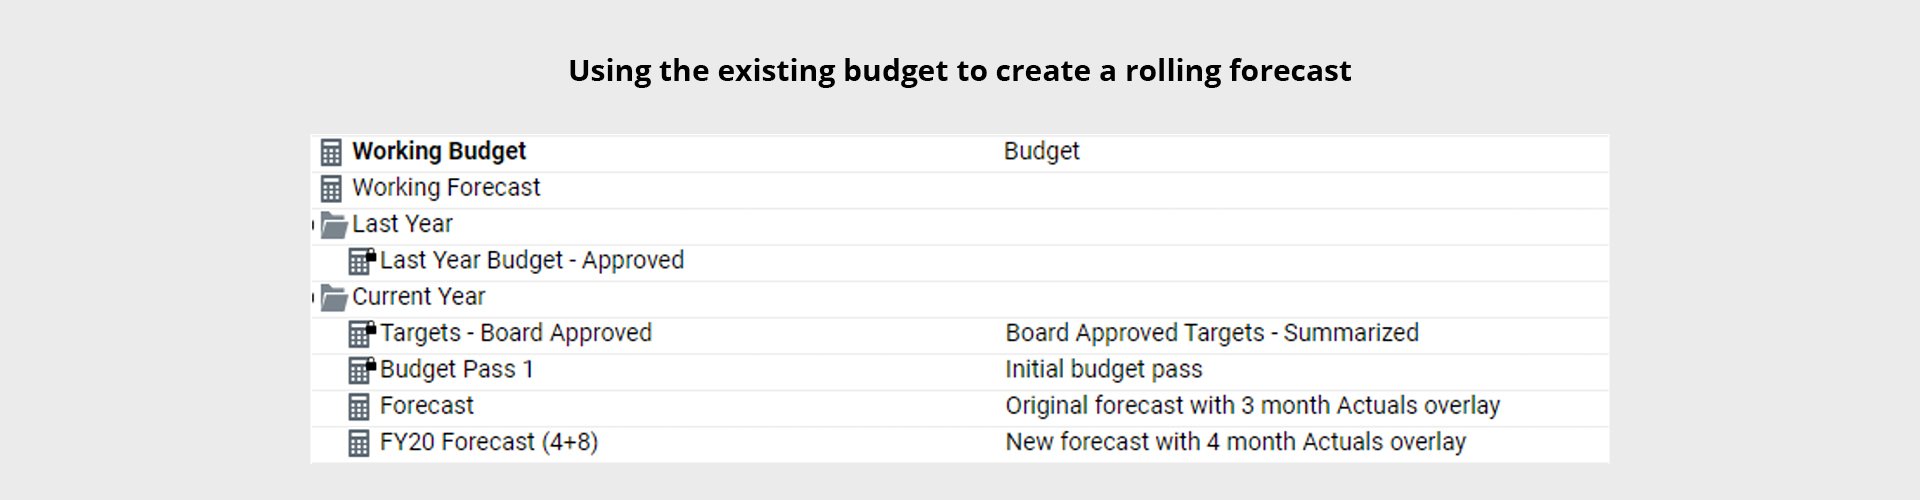 Using the existing budget to create a rolling forecast